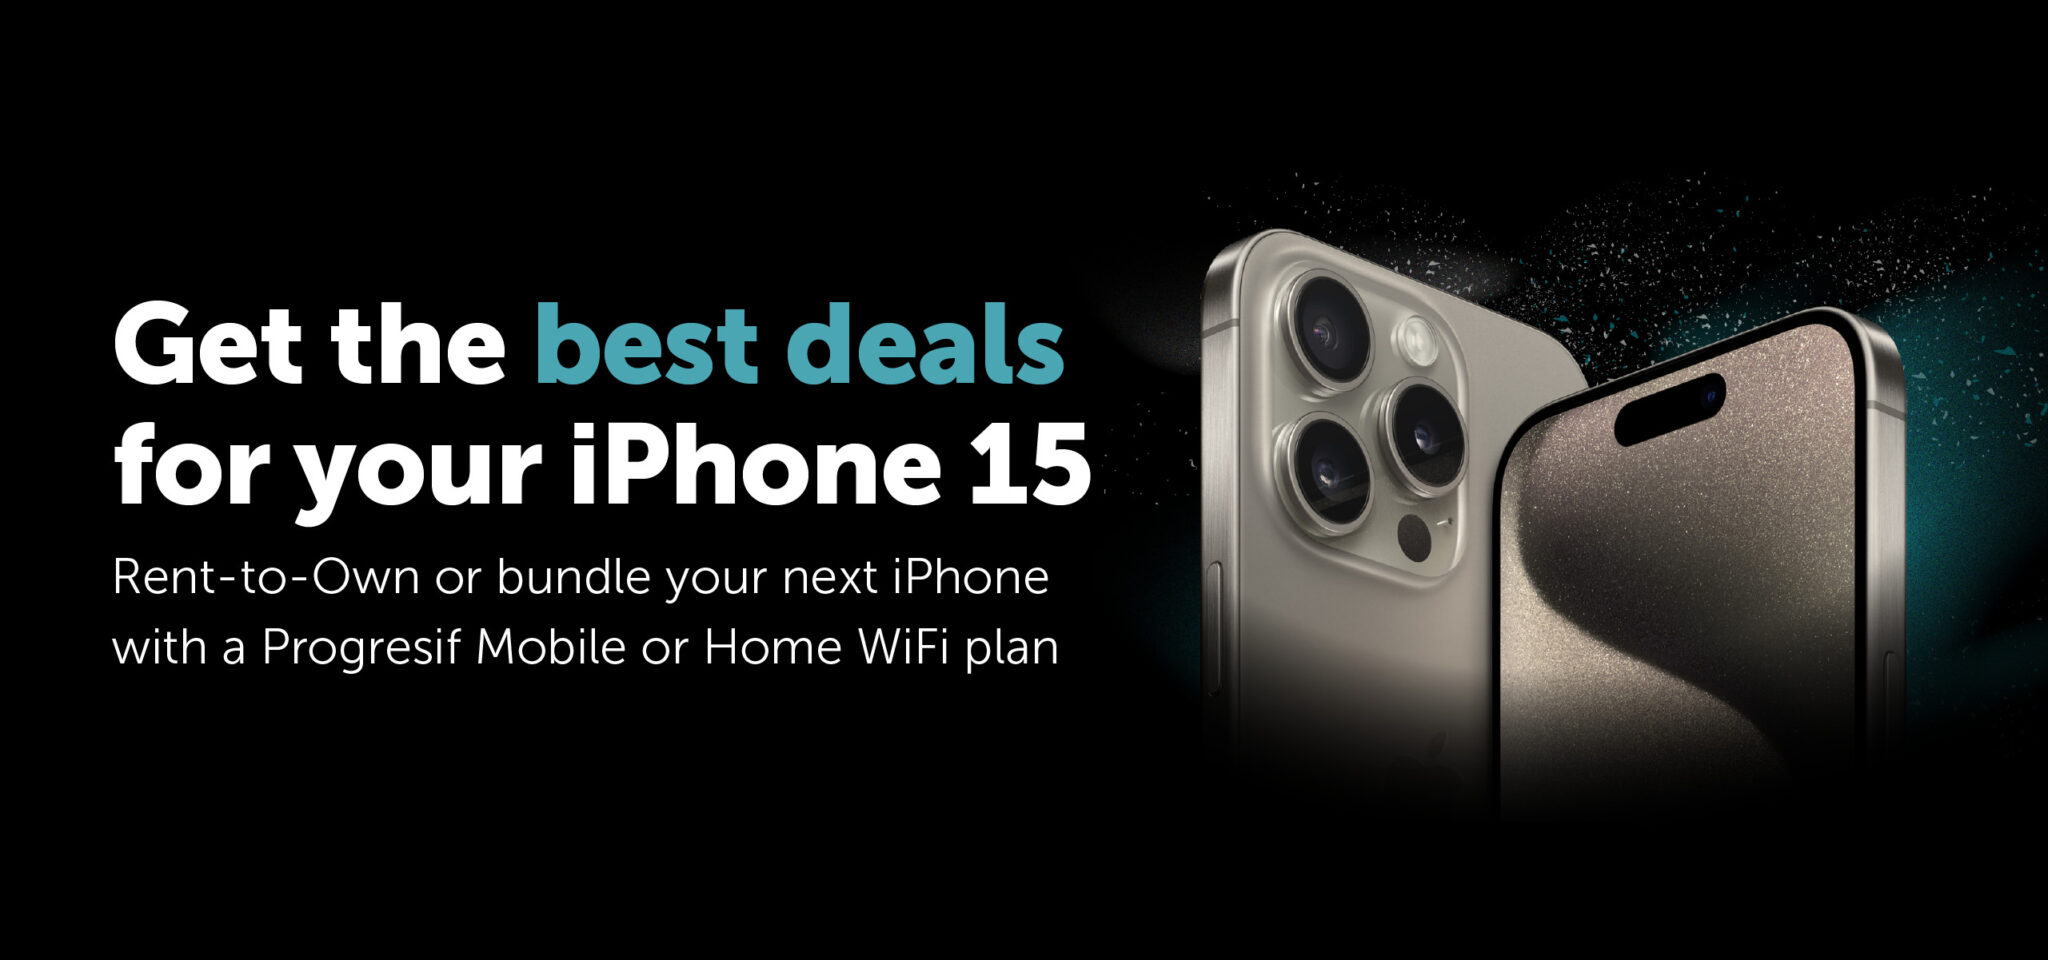 Get the best offer on iPhone 15